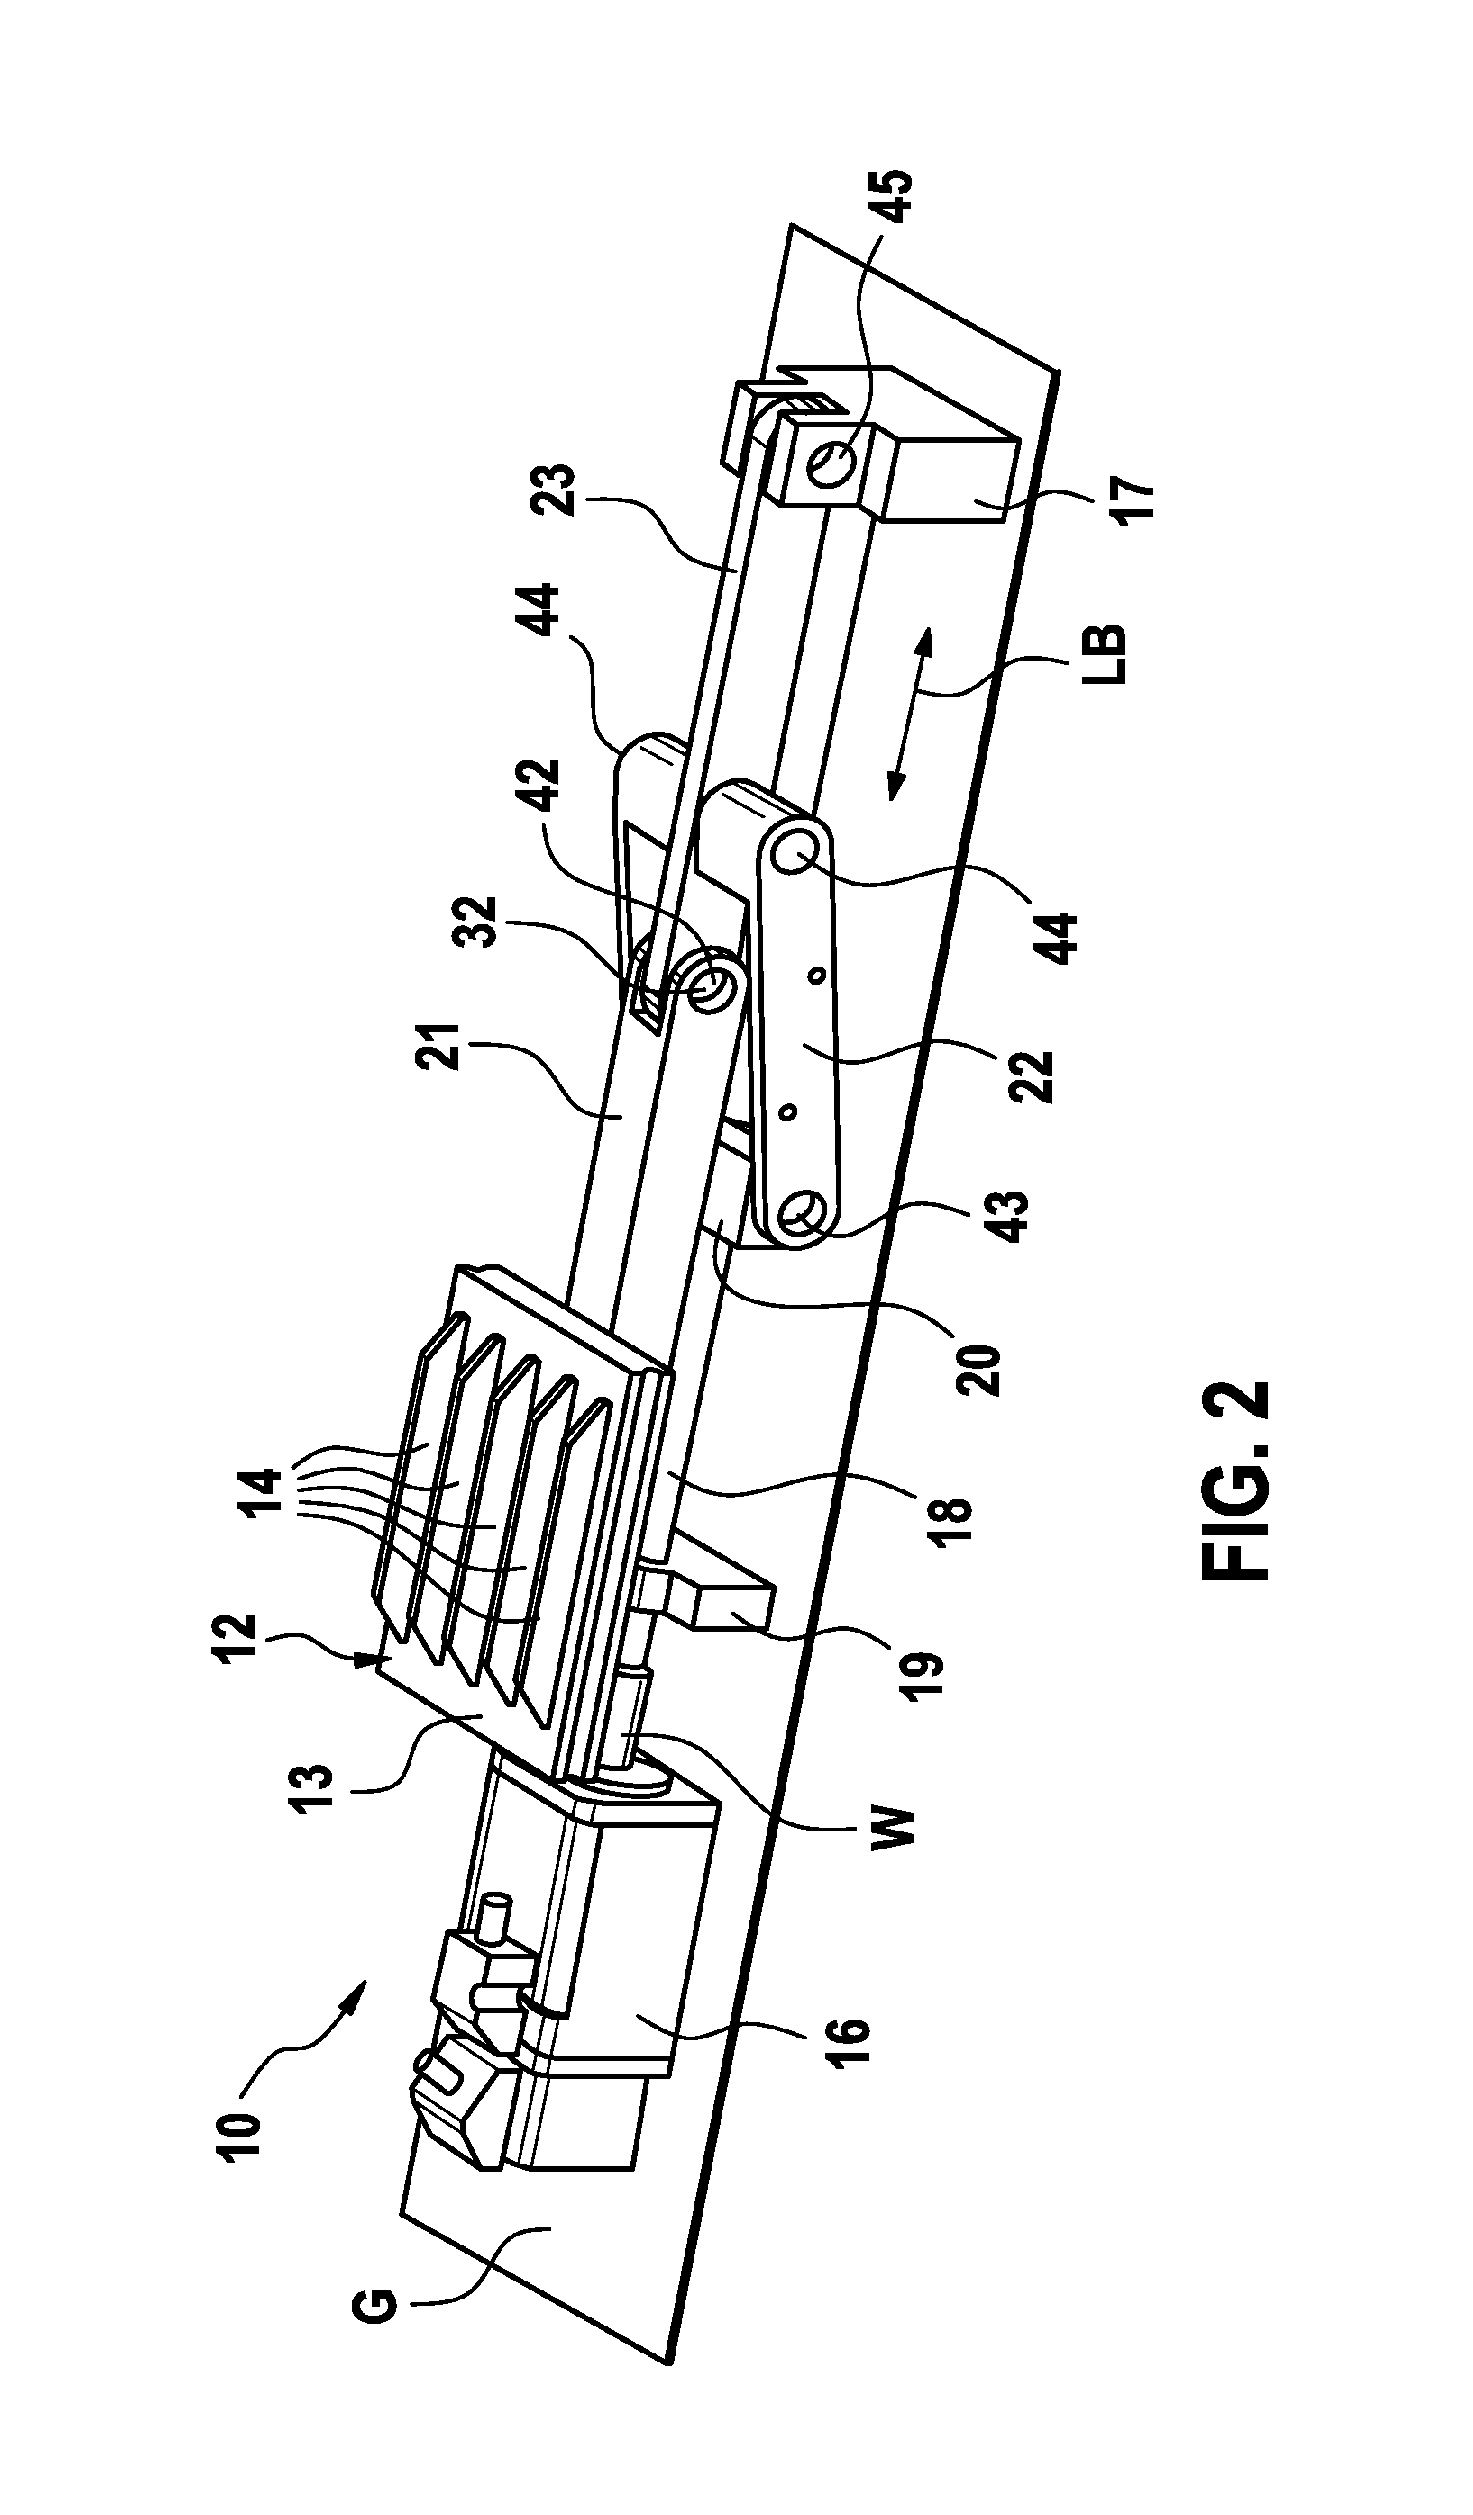 Electric charging device, electric connection device, system and method for charging a battery of a vehicle